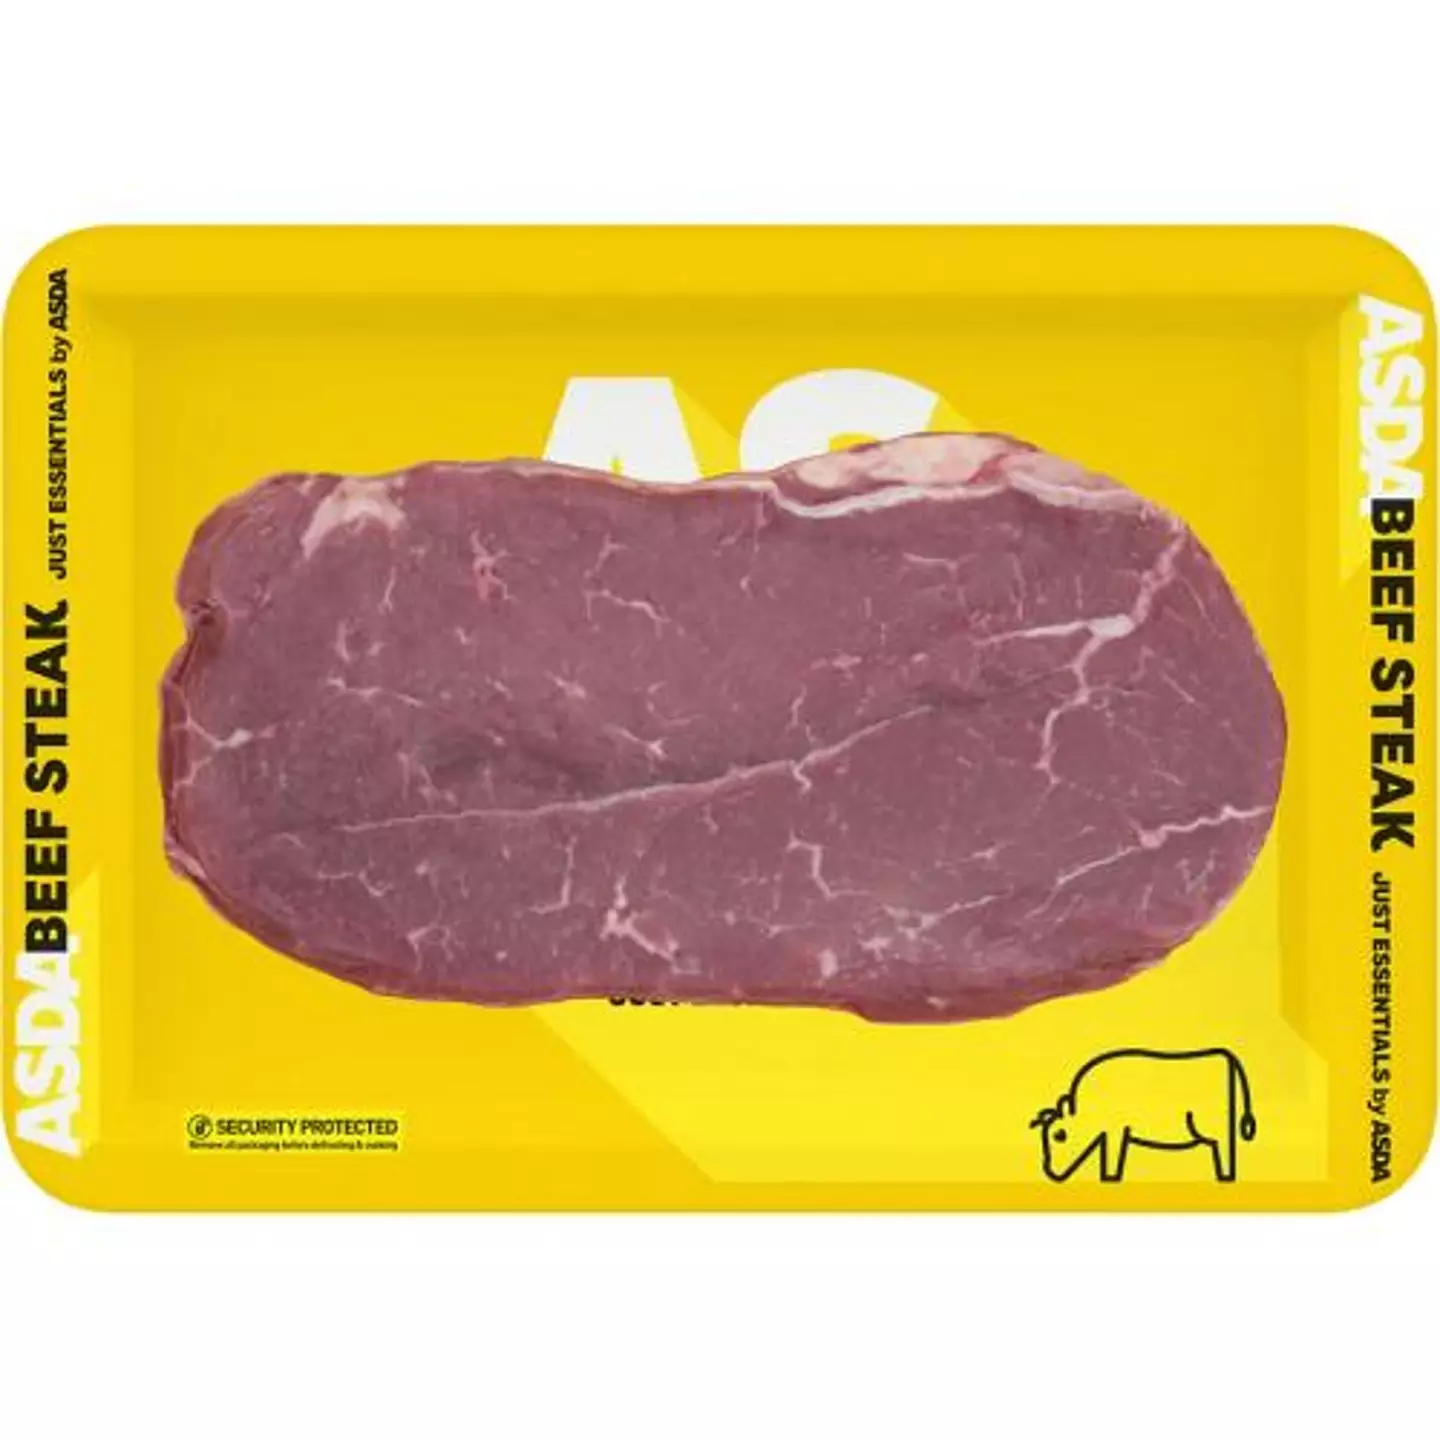 Asda steaks are just £2 for 170g of beef steak.